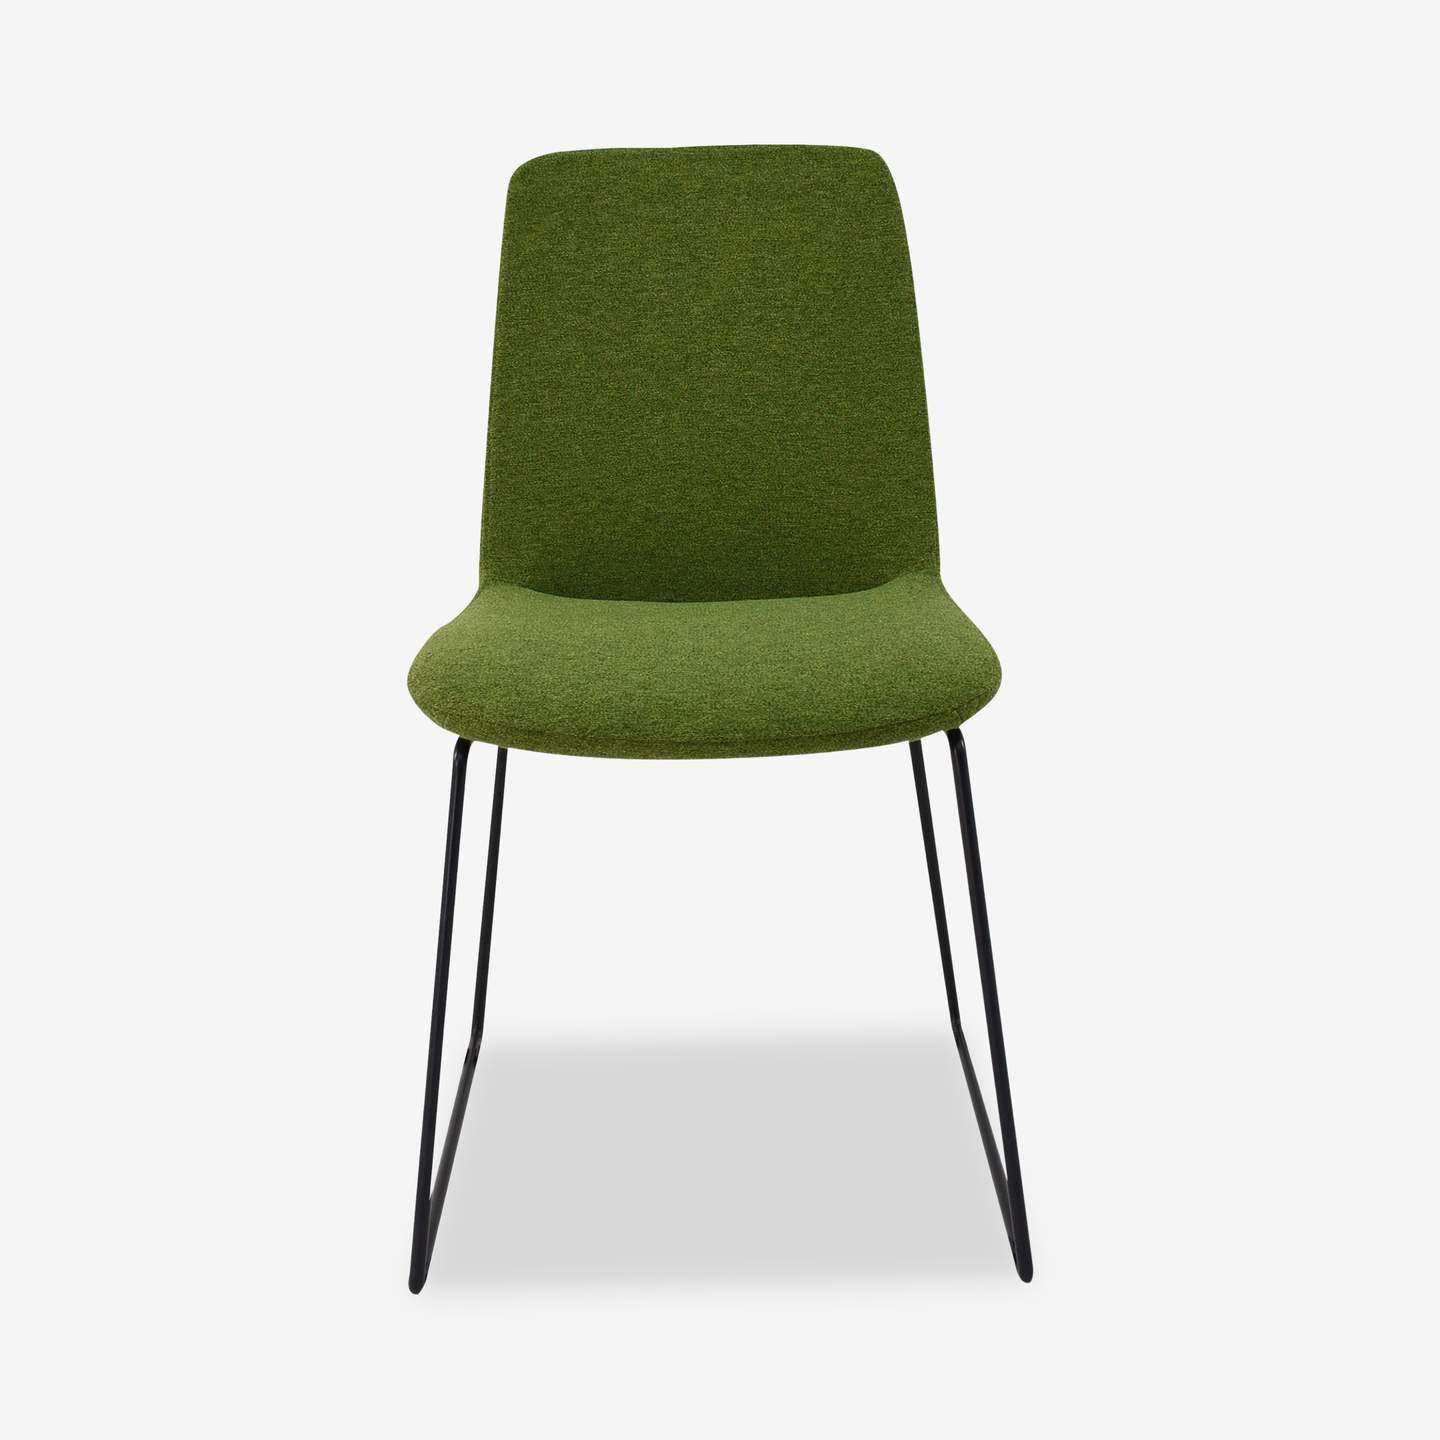 1086_Lyla-Dining-Chair-Green_Front_2020